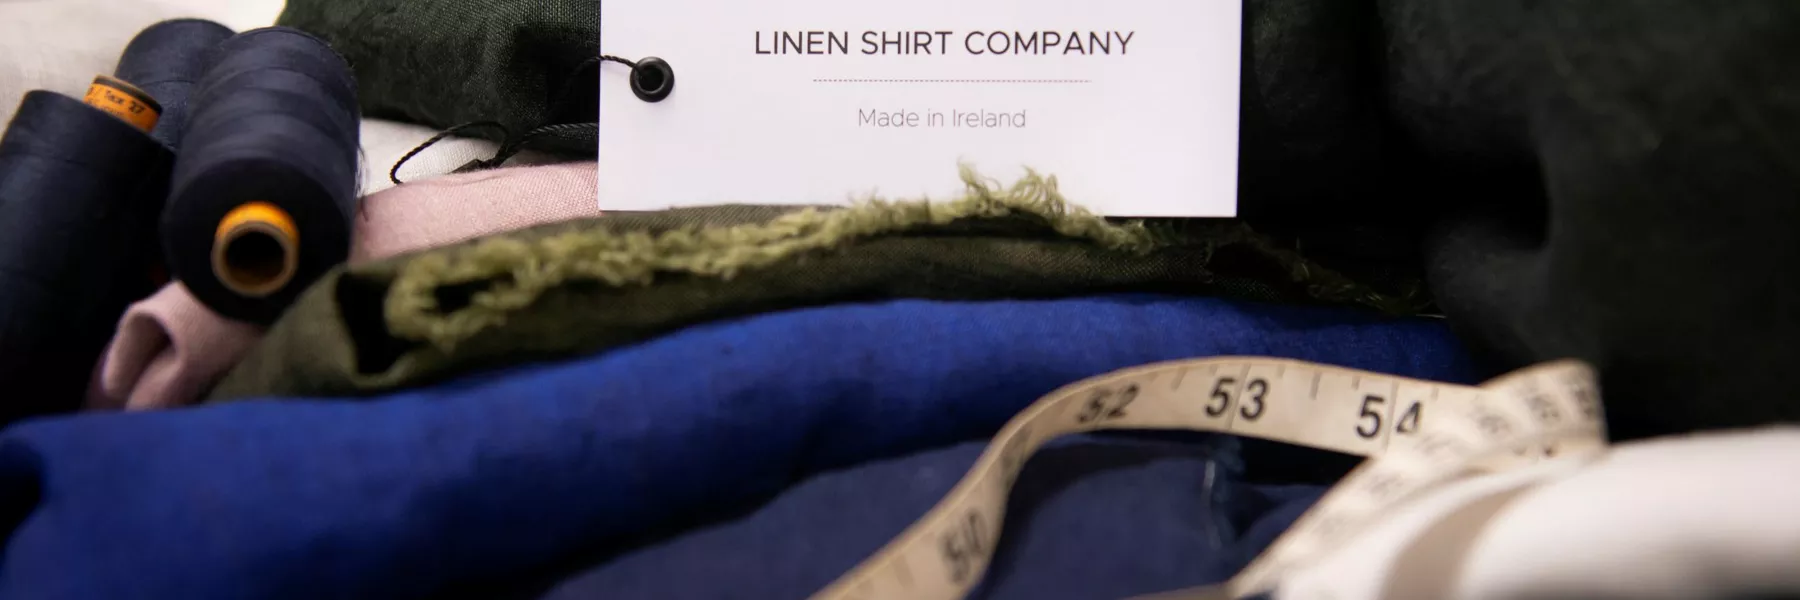 irish linen shirt collections - size guide for womens mens fashion made in ireland